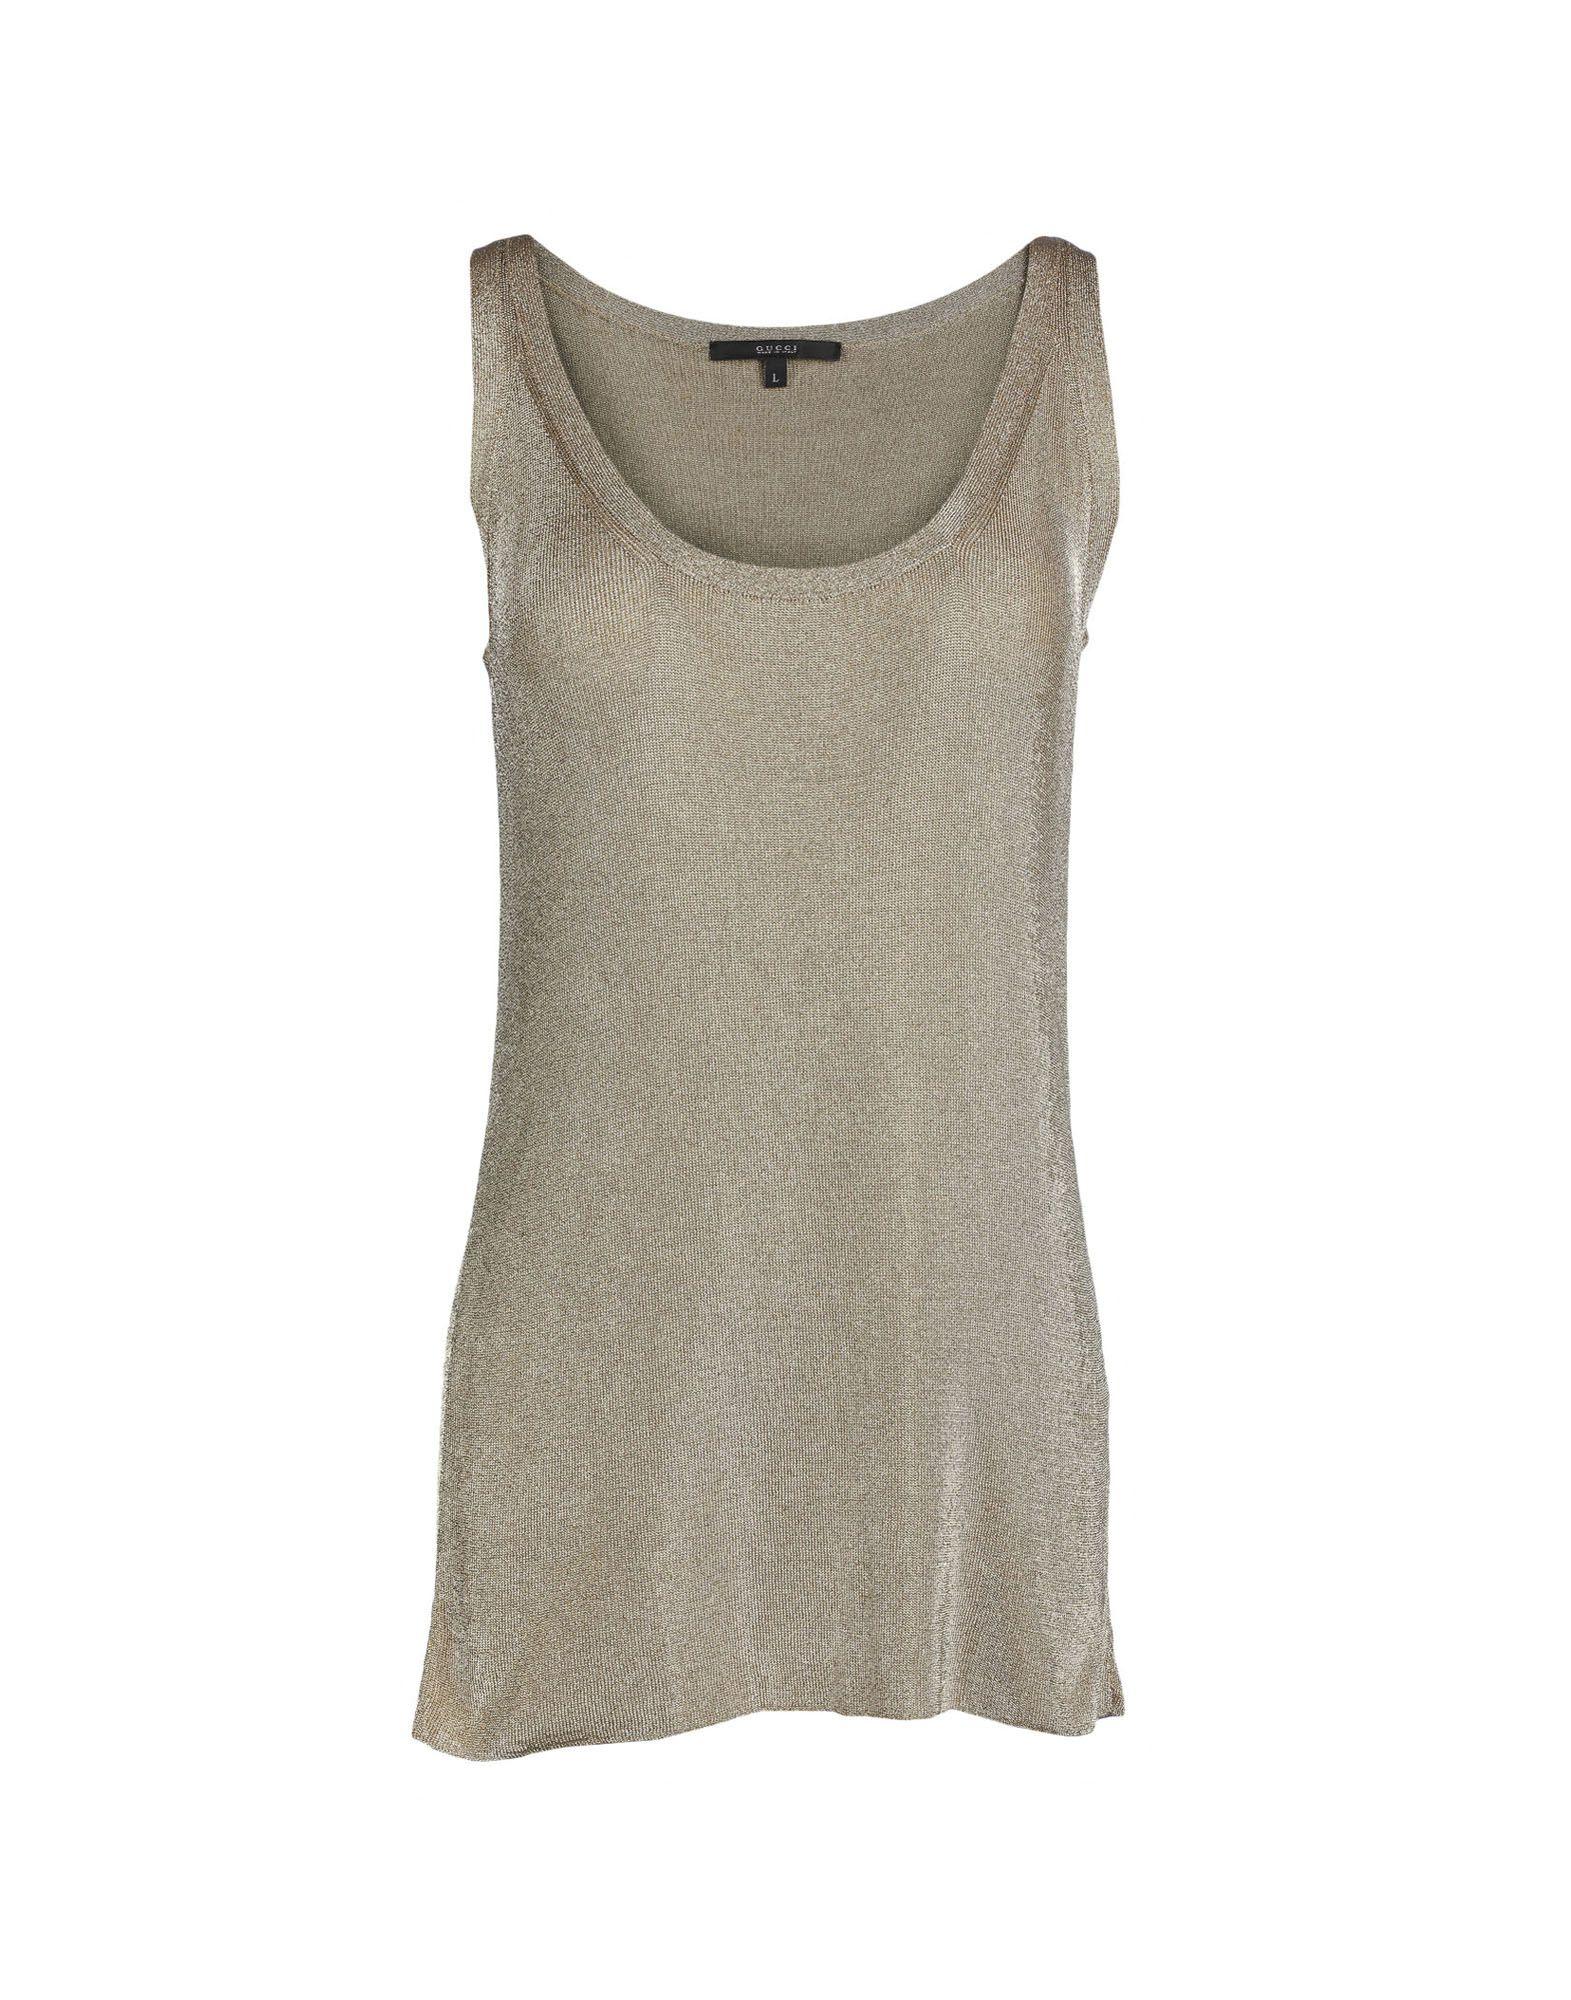 Gucci Synthetic Tank Top in Gold (Metallic) - Lyst